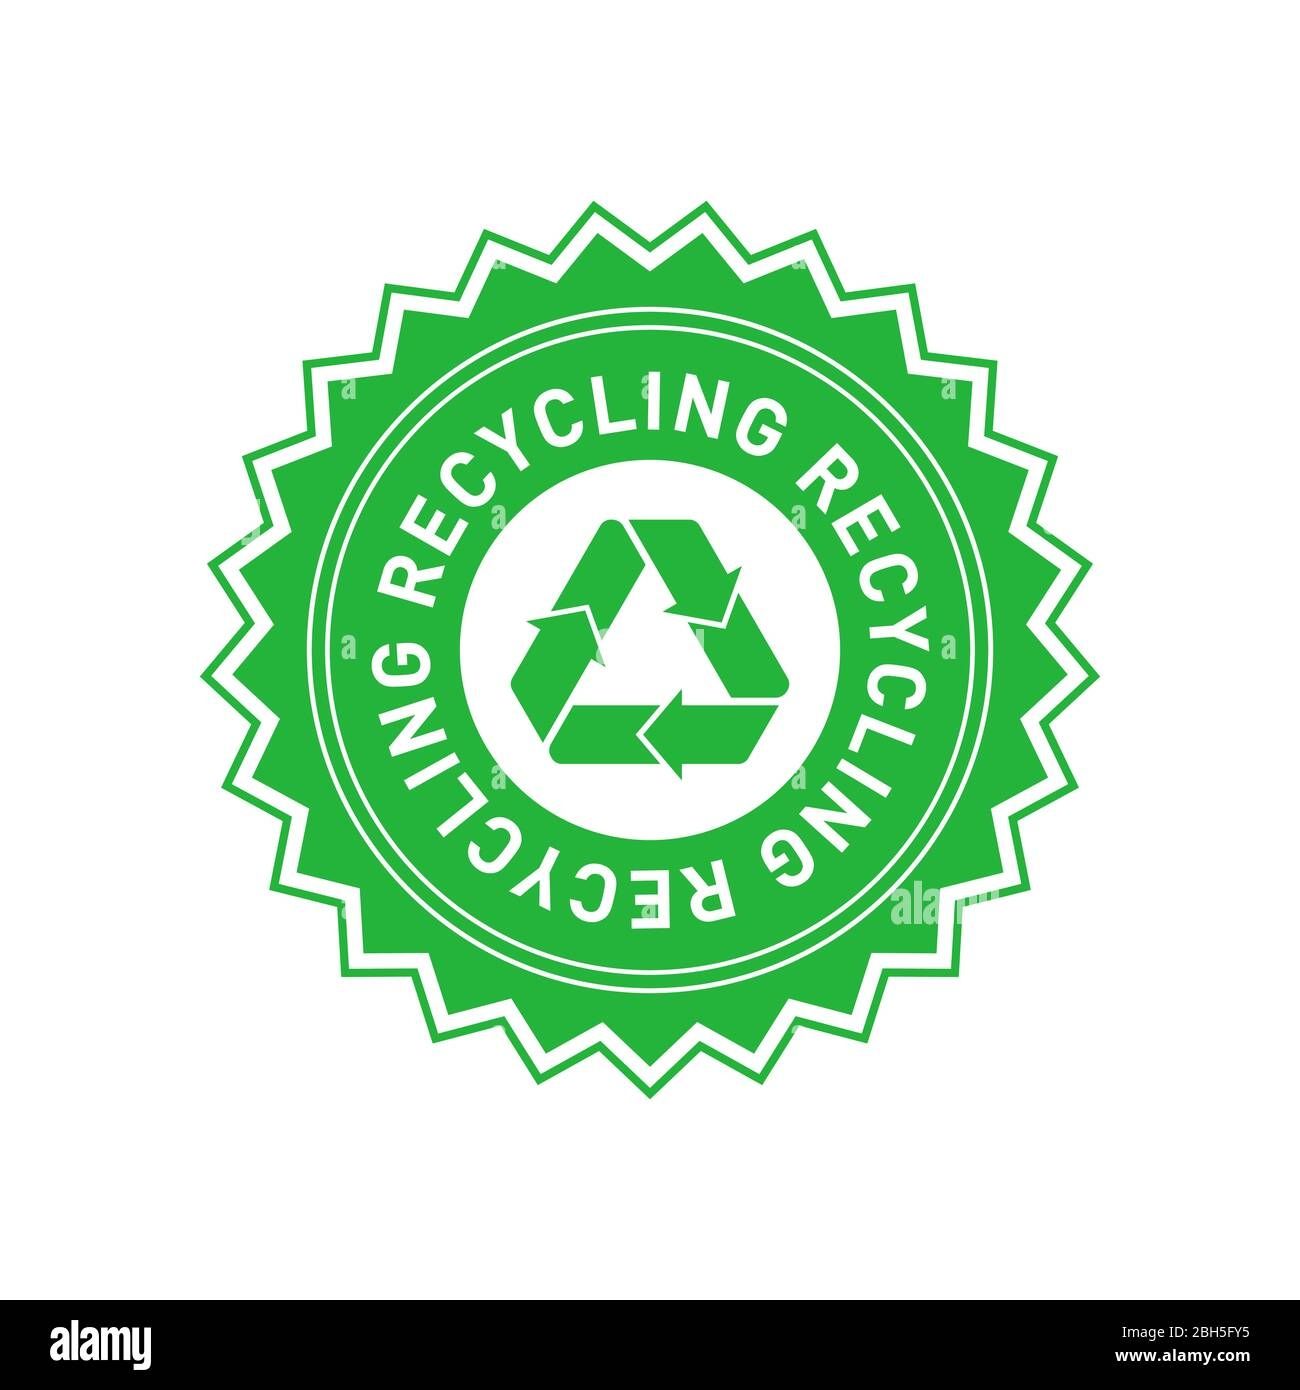 recycling-green-star-badge-with-mobius-strip-design-element-for-packaging-design-and-promotion...jpg